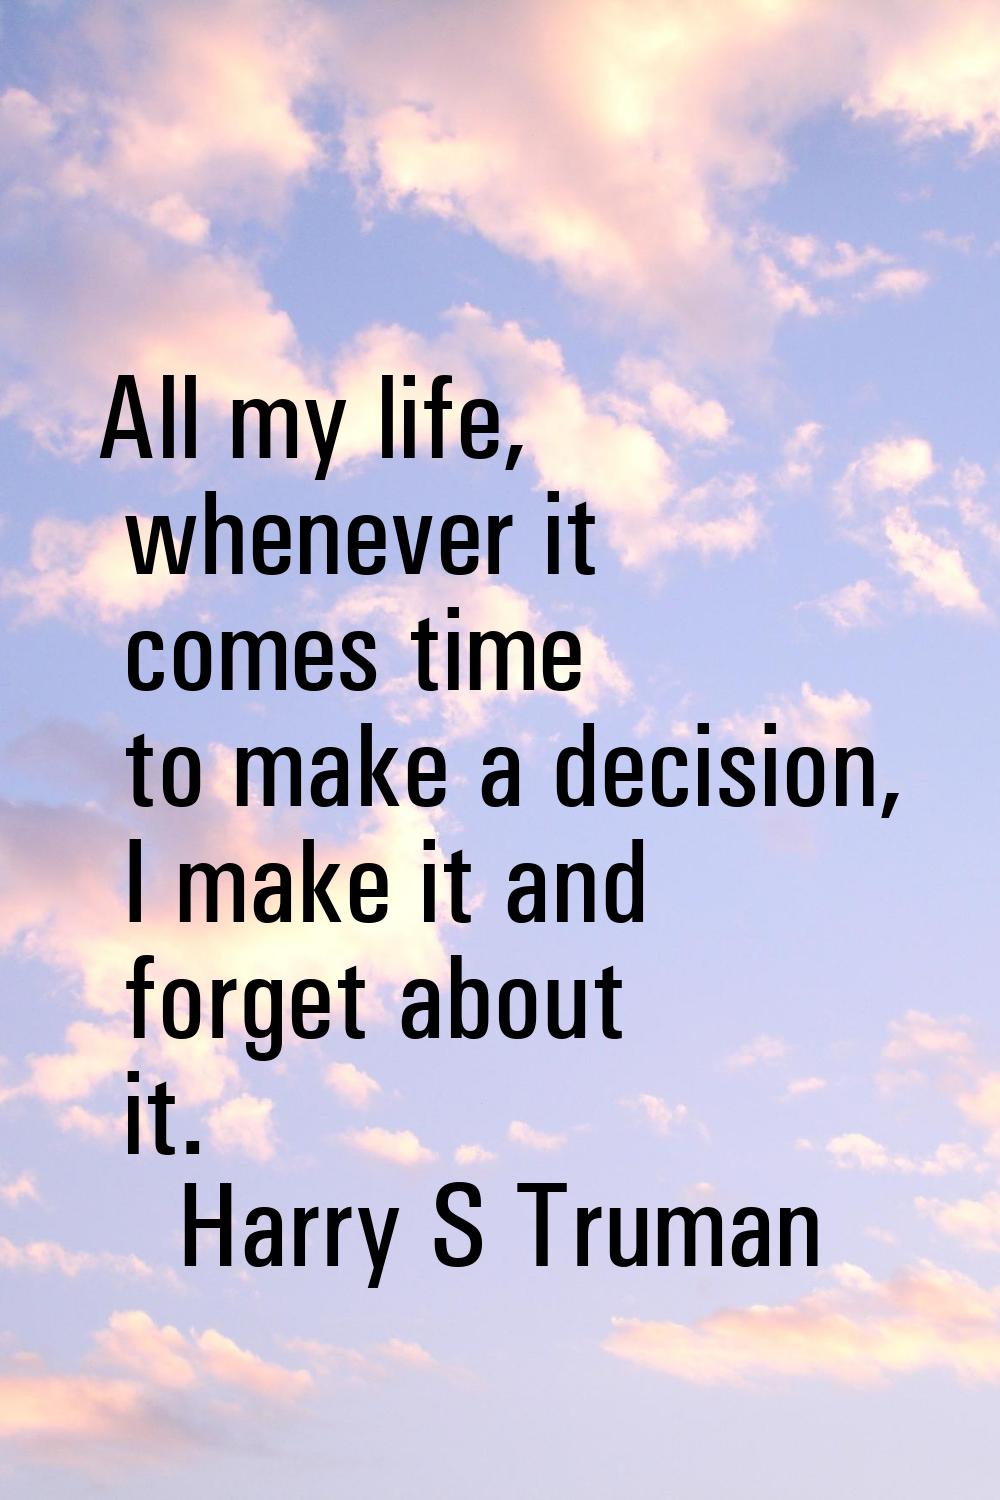 All my life, whenever it comes time to make a decision, I make it and forget about it.